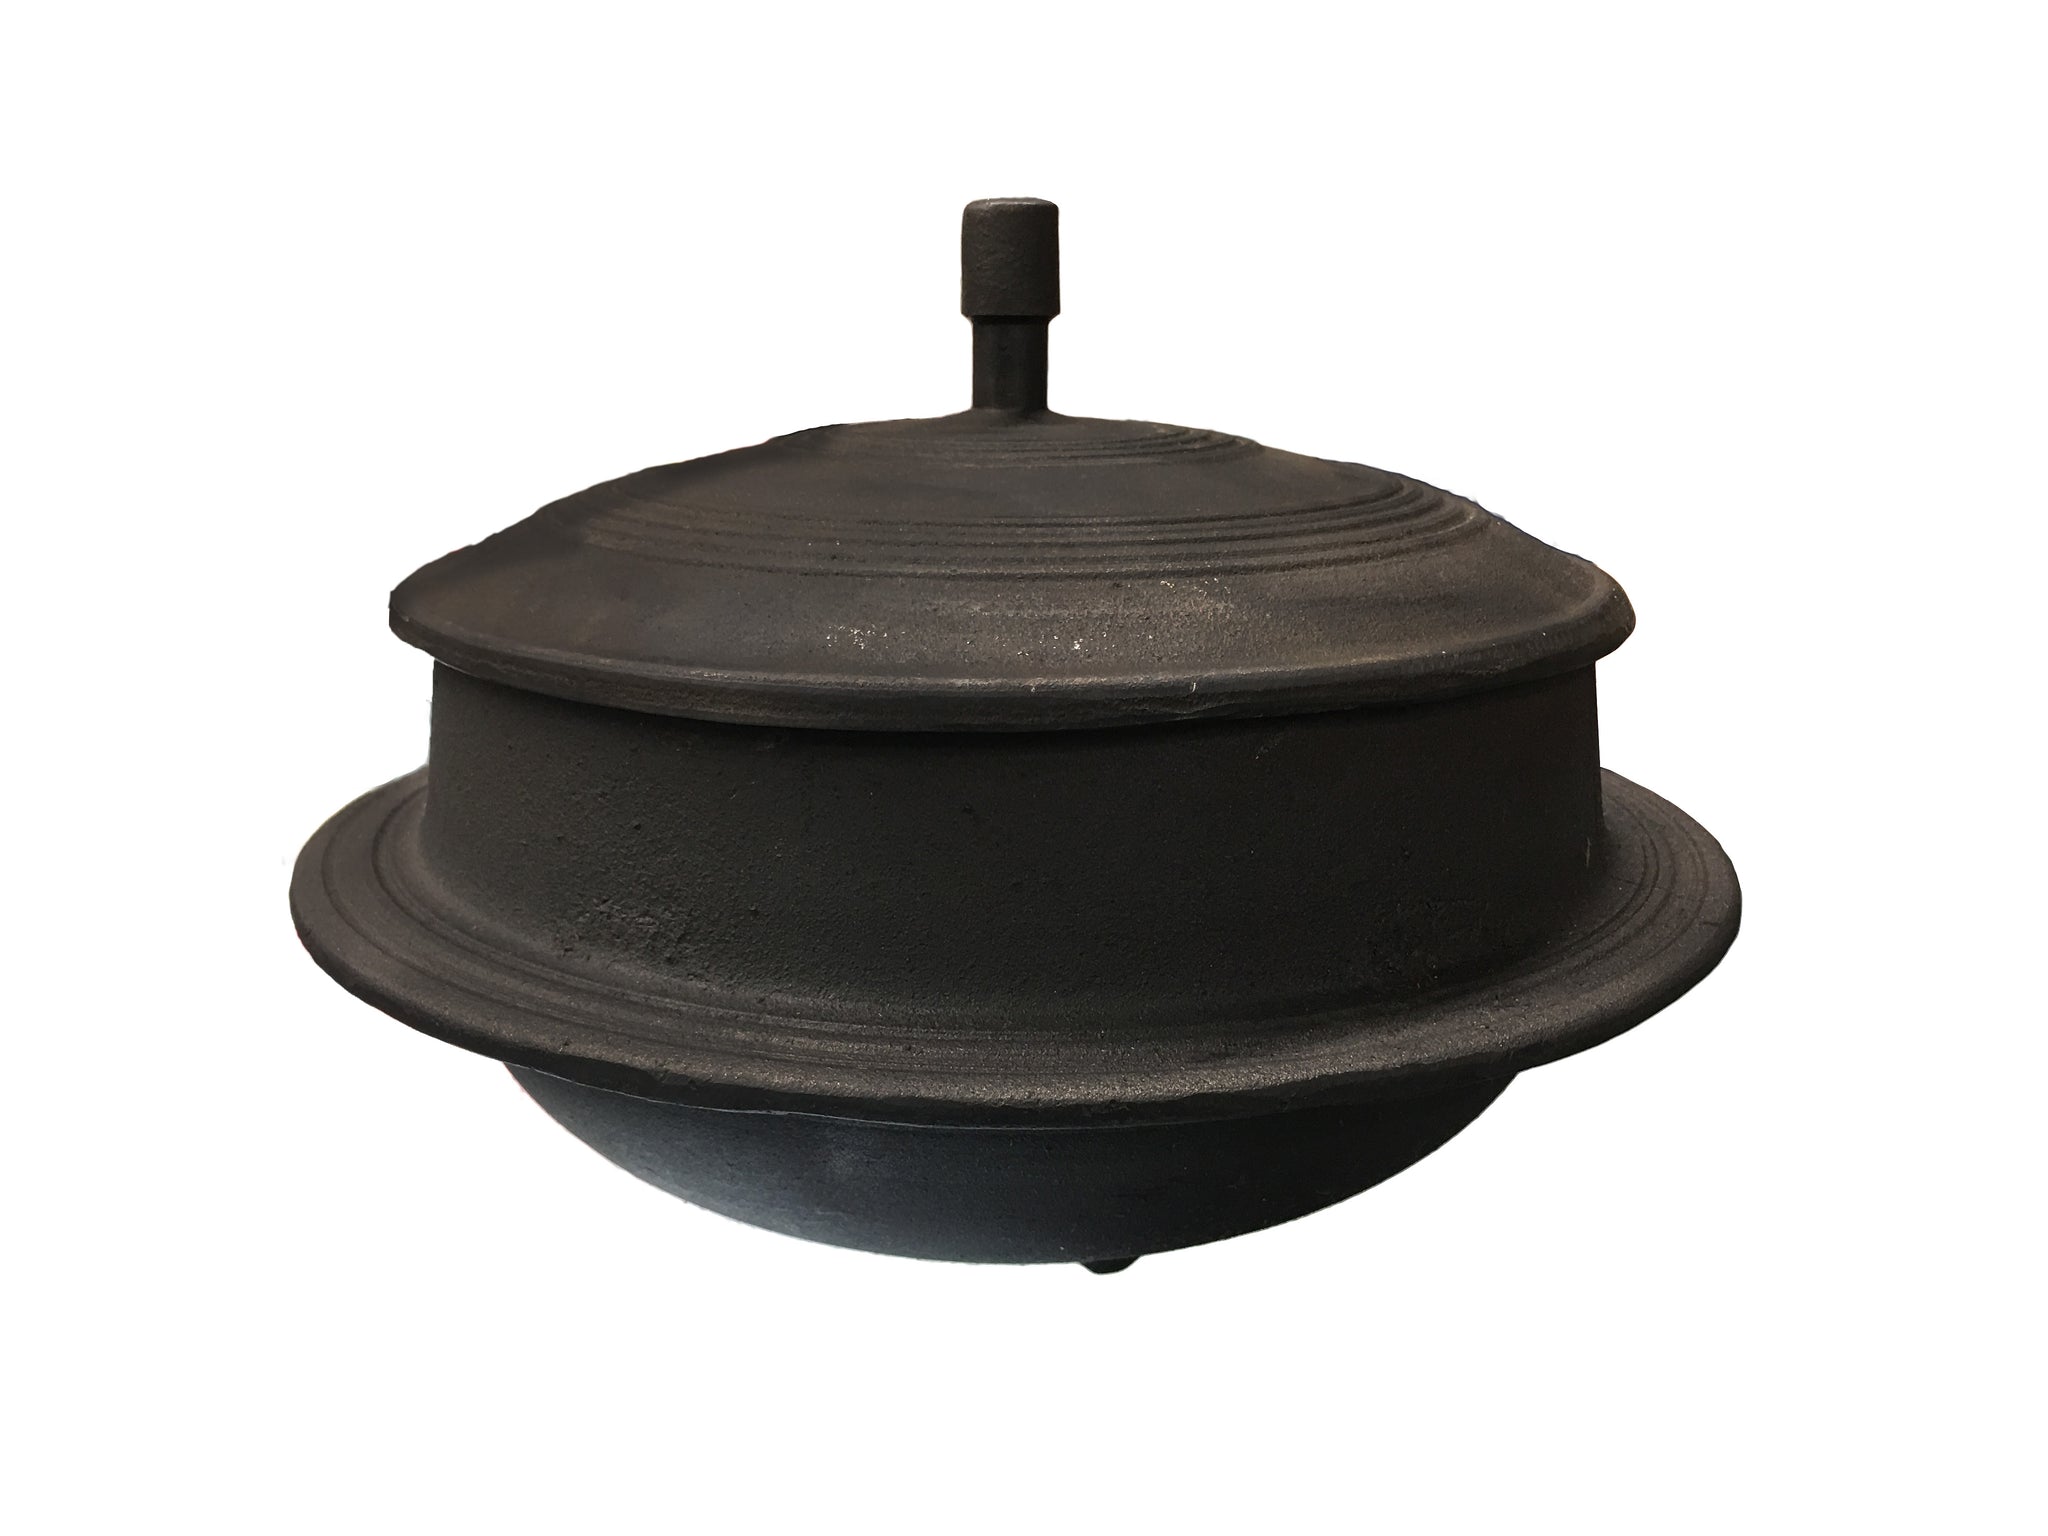 Korean Cast Iron Traditional Cooking Pot with Lid, Gamasot 가마솥